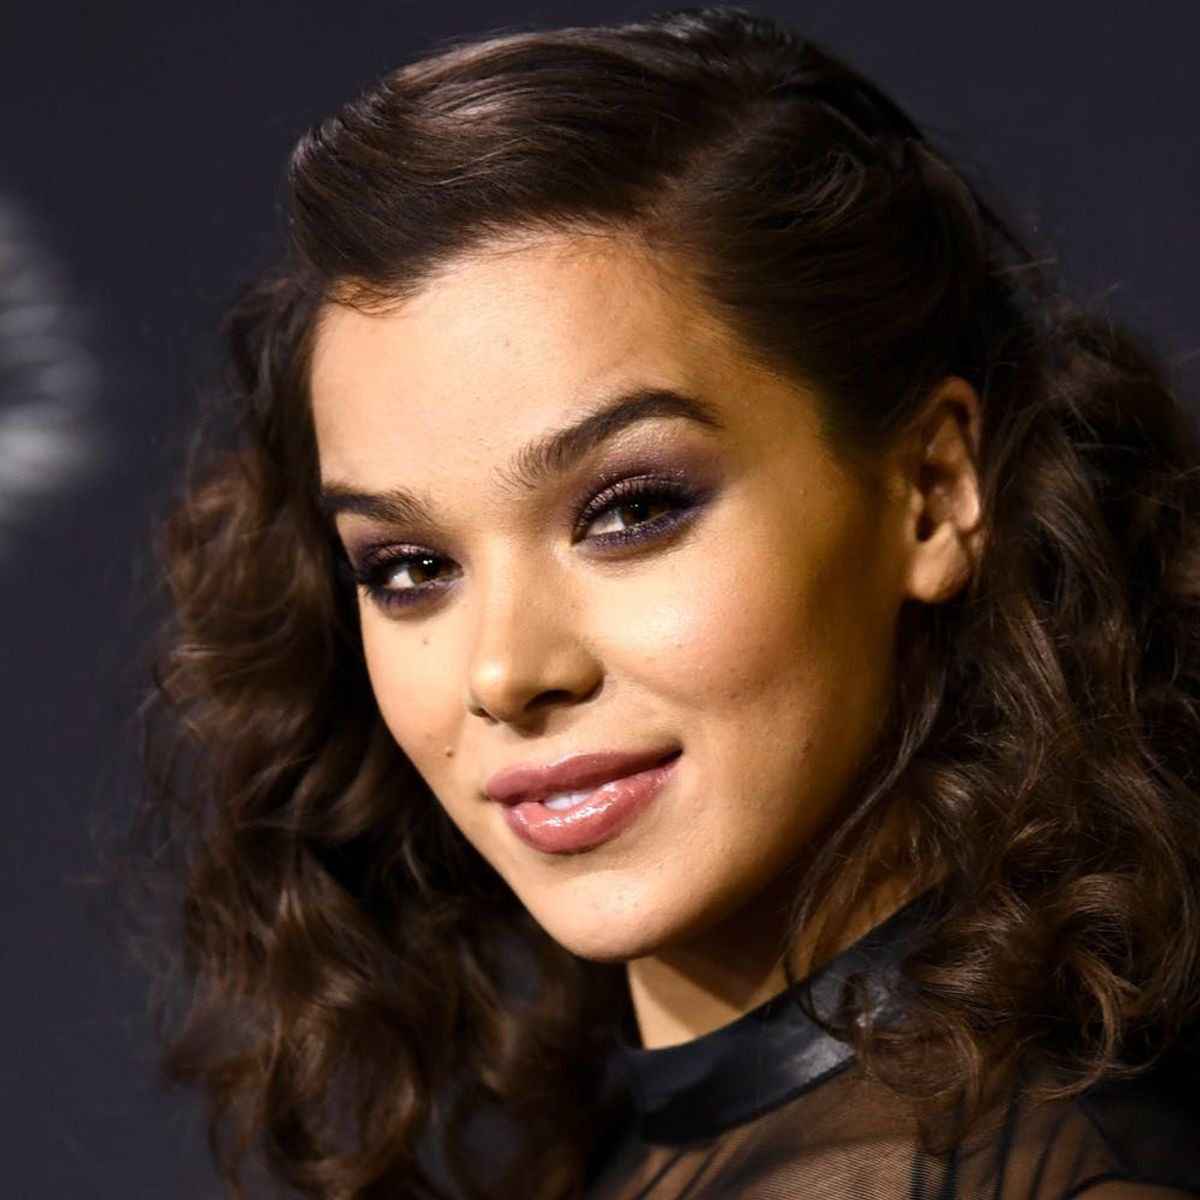 Hailee Steinfeld Just Debuted a 21st Birthday Dress to Rival Kendall Jenner’s